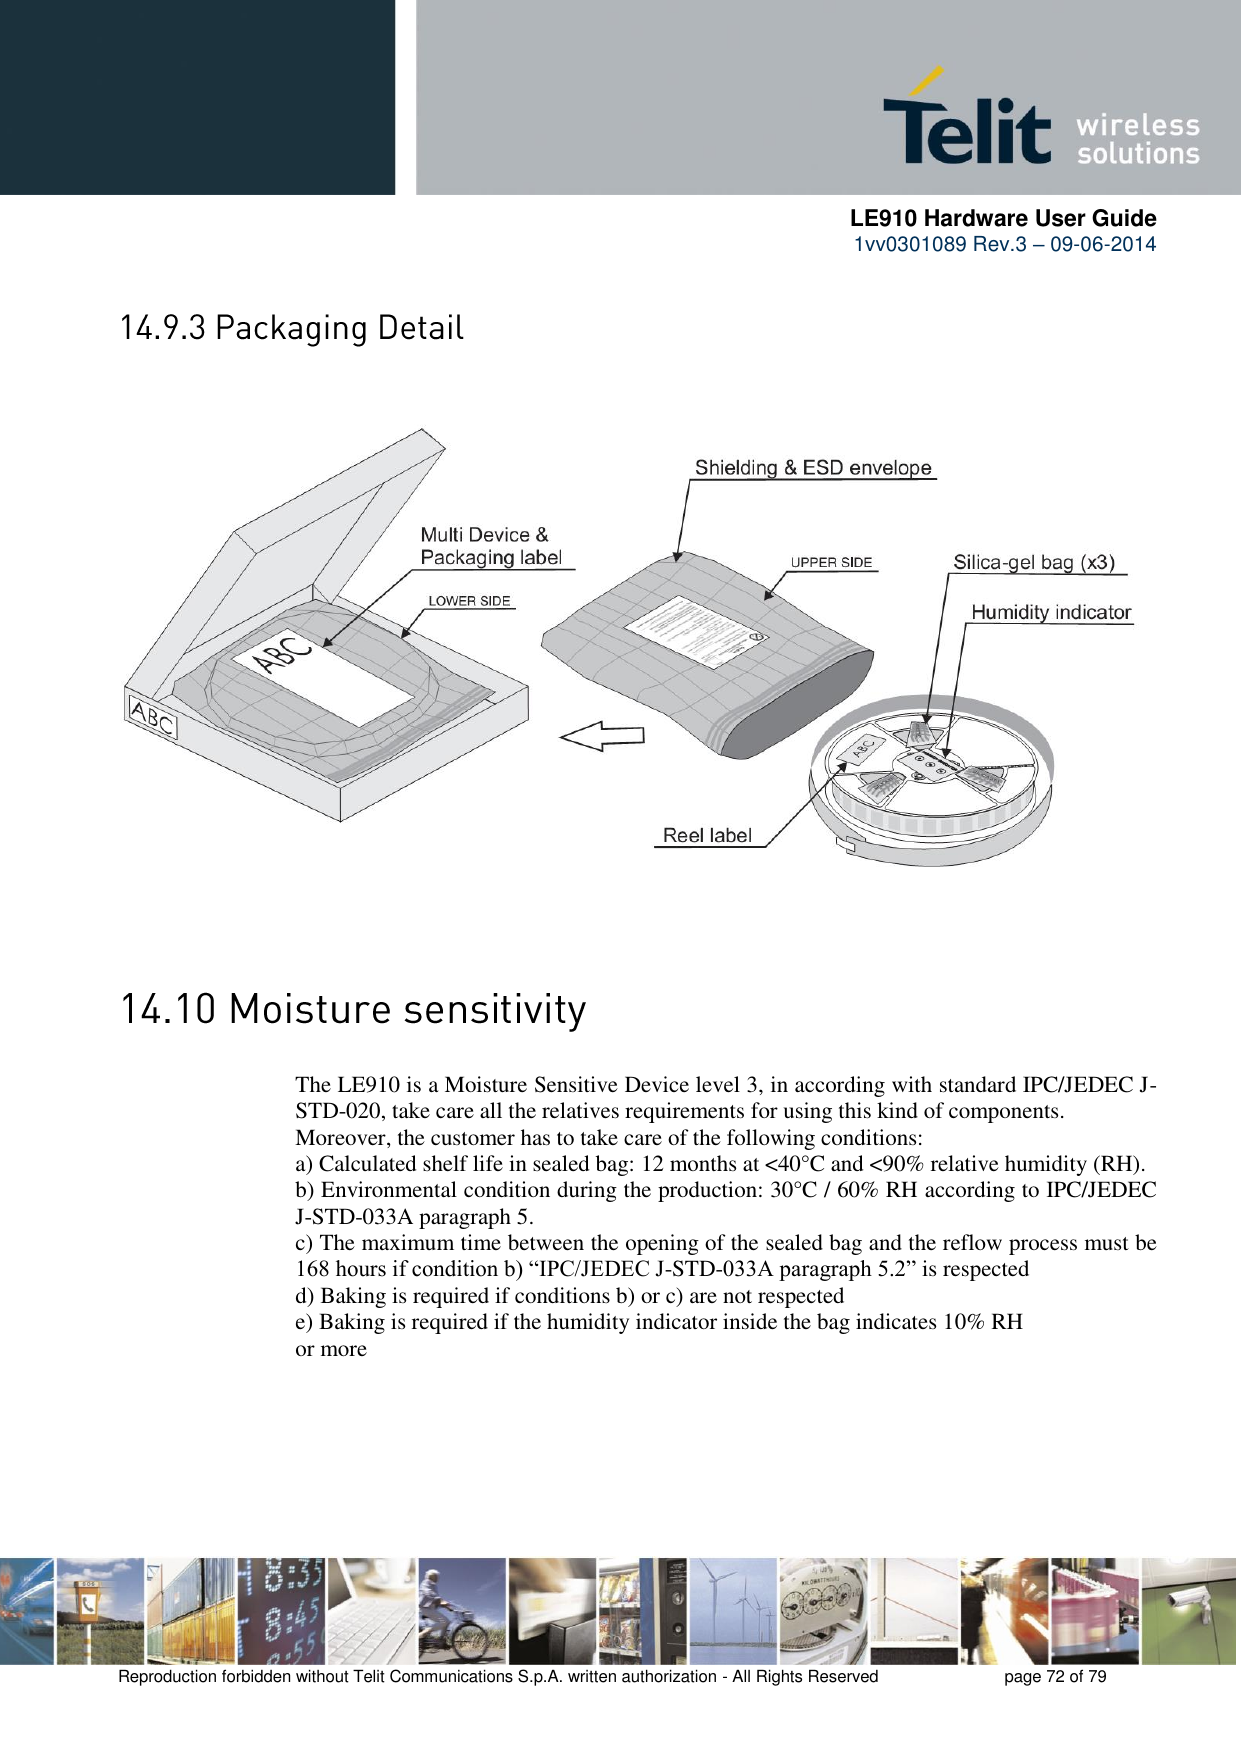      LE910 Hardware User Guide 1vv0301089 Rev.3 – 09-06-2014    Reproduction forbidden without Telit Communications S.p.A. written authorization - All Rights Reserved    page 72 of 79         The LE910 is a Moisture Sensitive Device level 3, in according with standard IPC/JEDEC J-STD-020, take care all the relatives requirements for using this kind of components. Moreover, the customer has to take care of the following conditions: a) Calculated shelf life in sealed bag: 12 months at &lt;40°C and &lt;90% relative humidity (RH). b) Environmental condition during the production: 30°C / 60% RH according to IPC/JEDEC J-STD-033A paragraph 5. c) The maximum time between the opening of the sealed bag and the reflow process must be 168 hours if condition b) “IPC/JEDEC J-STD-033A paragraph 5.2” is respected d) Baking is required if conditions b) or c) are not respected e) Baking is required if the humidity indicator inside the bag indicates 10% RH or more 